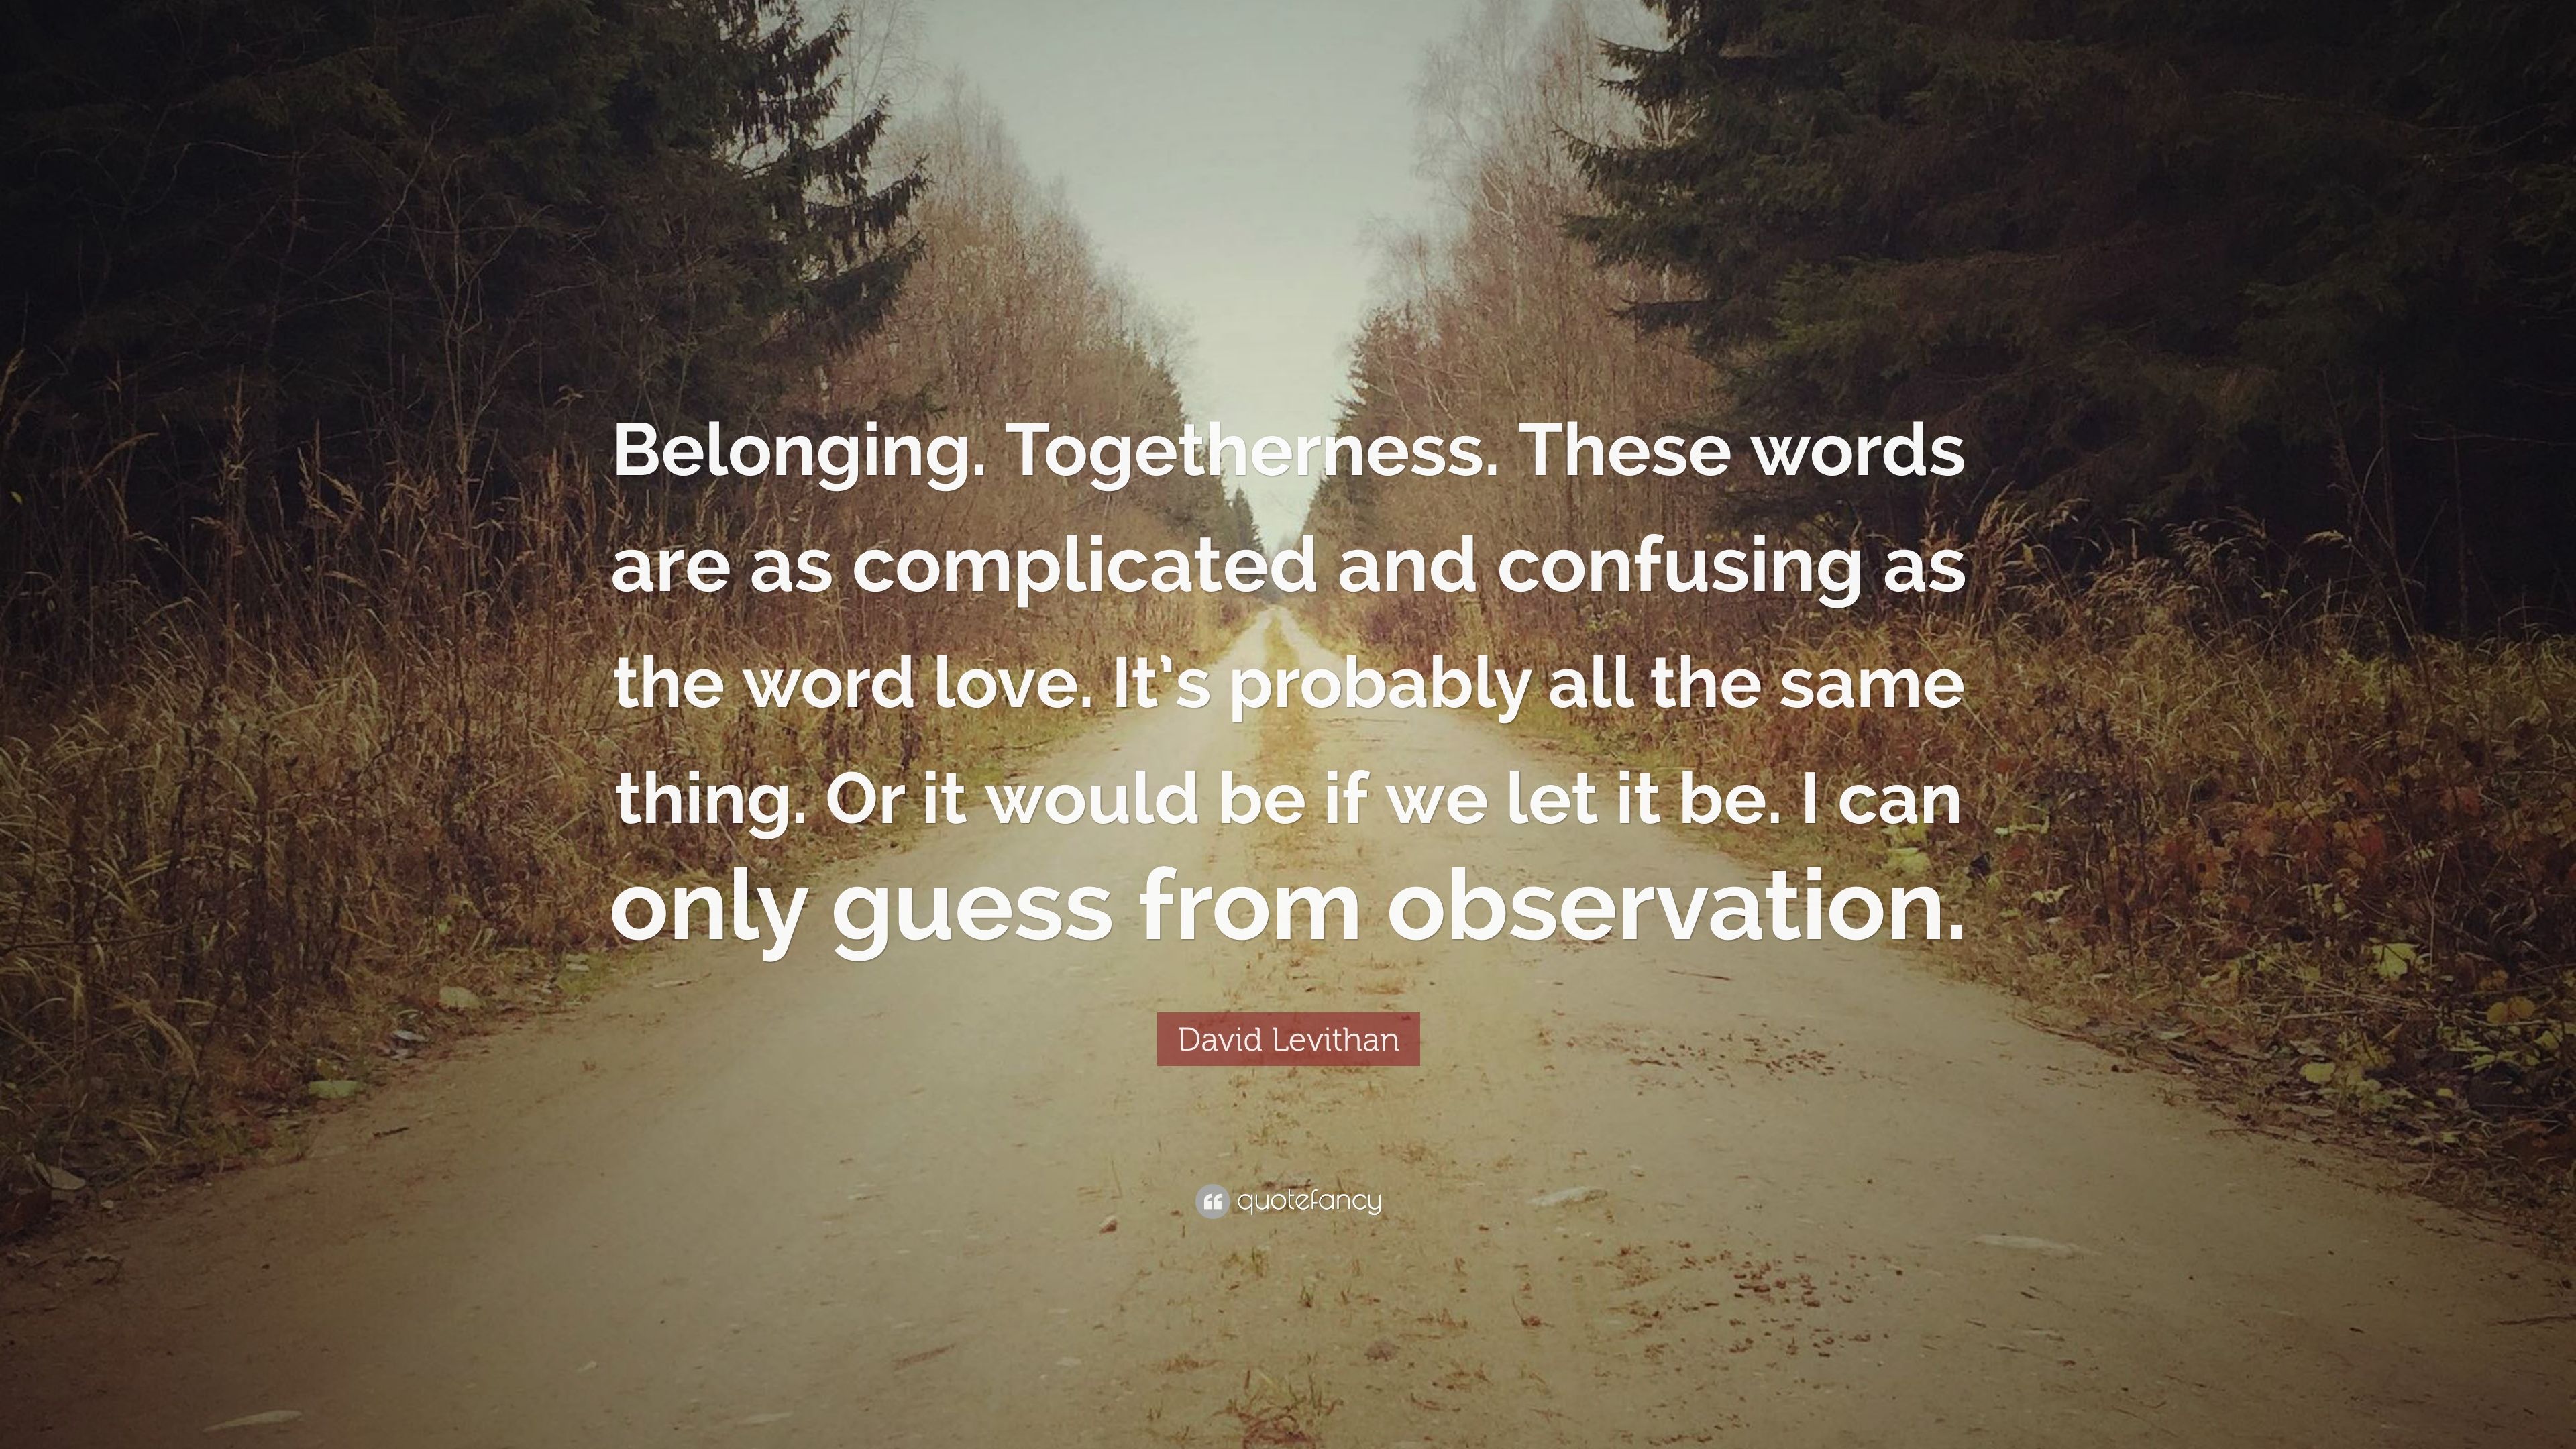 David Levithan Quote: “Belonging. Togetherness. These words are as complicated and confusing as the word love. It's probably all the same thing.” (7 wallpaper)